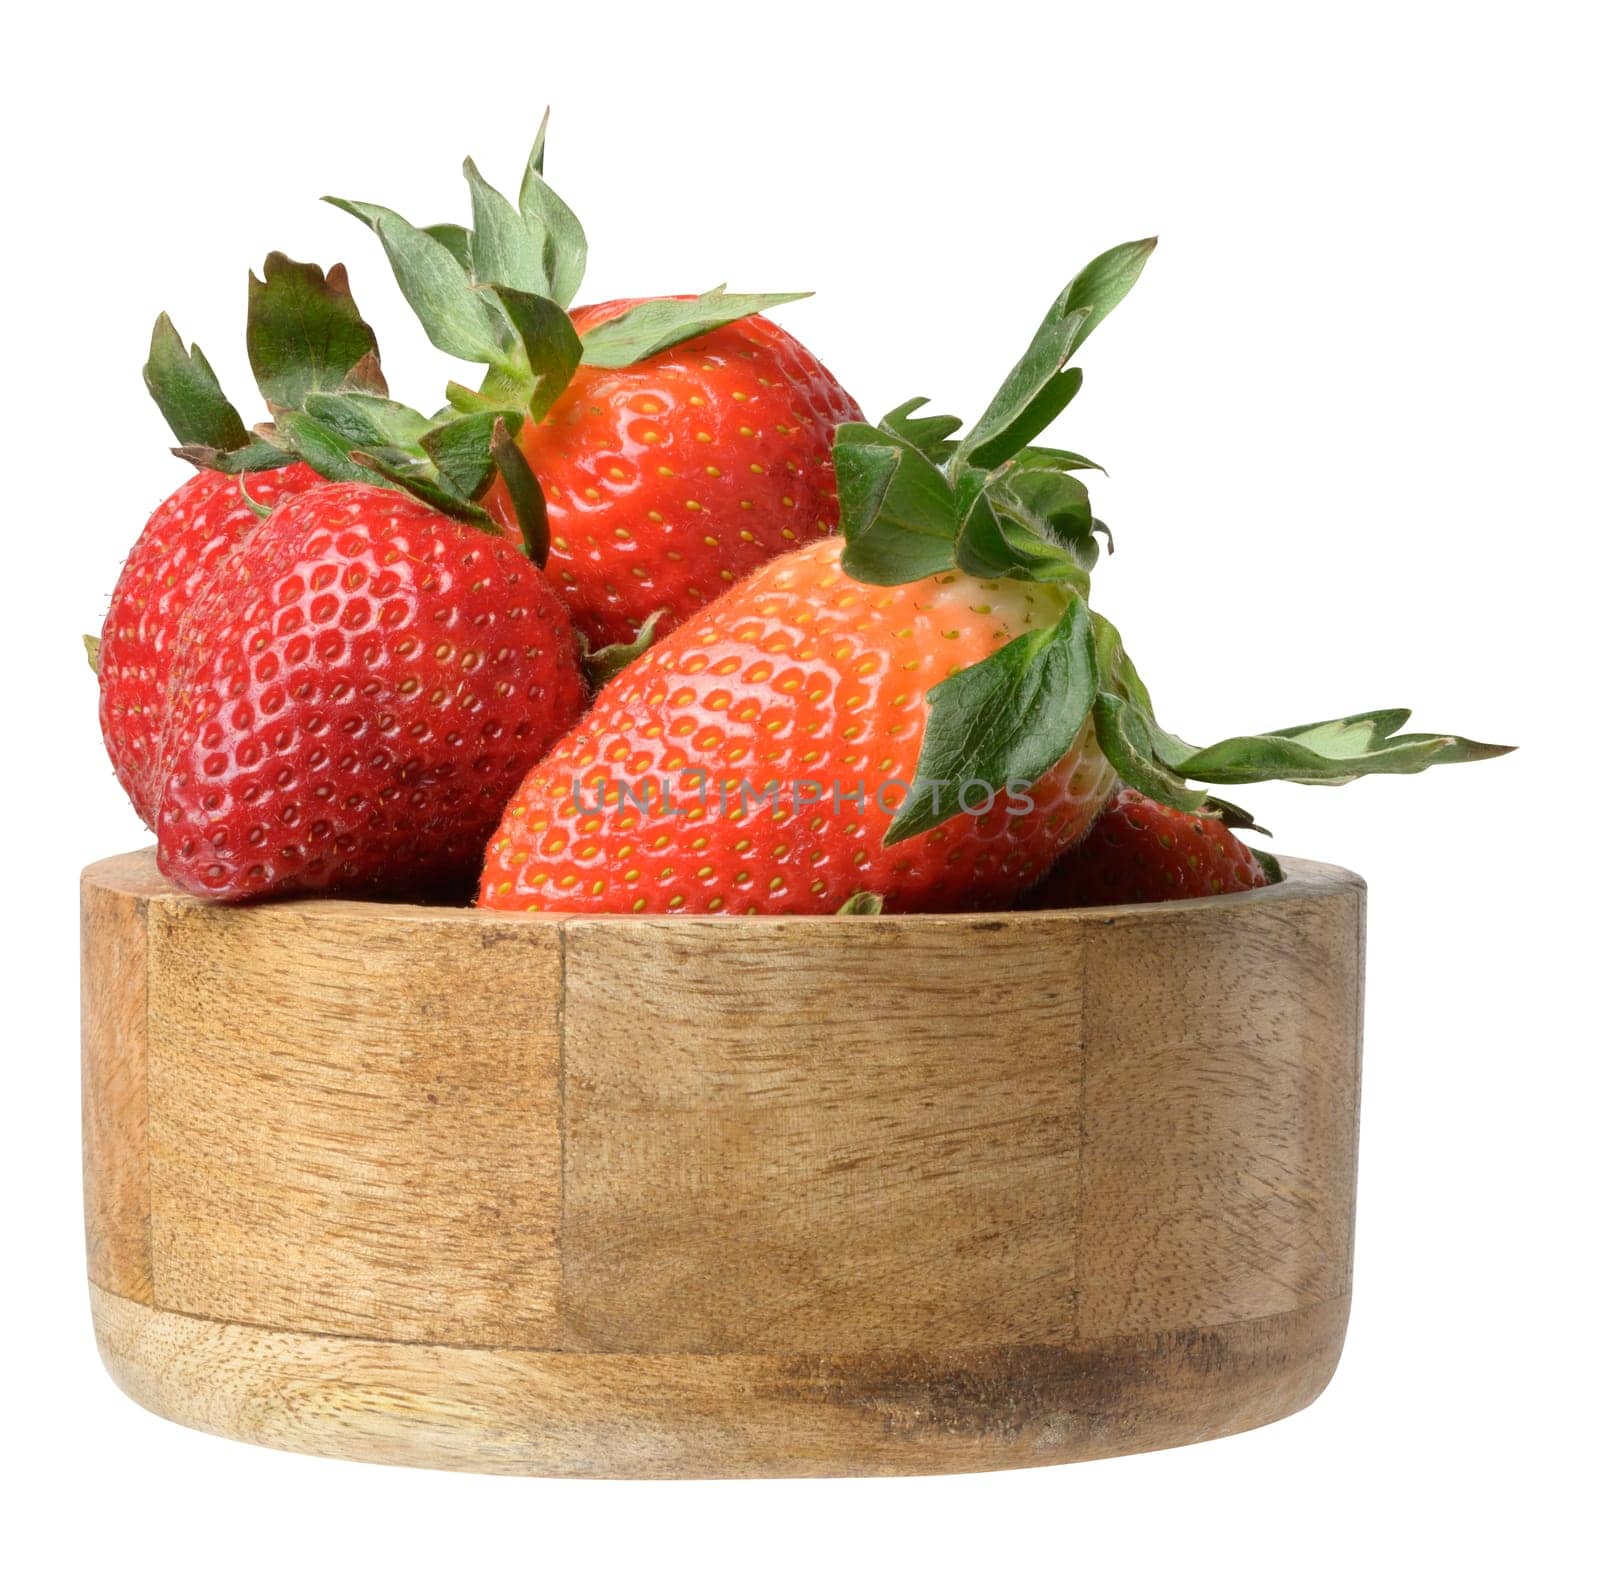 Ripe red strawberries in a wooden bowl on an isolated background by ndanko